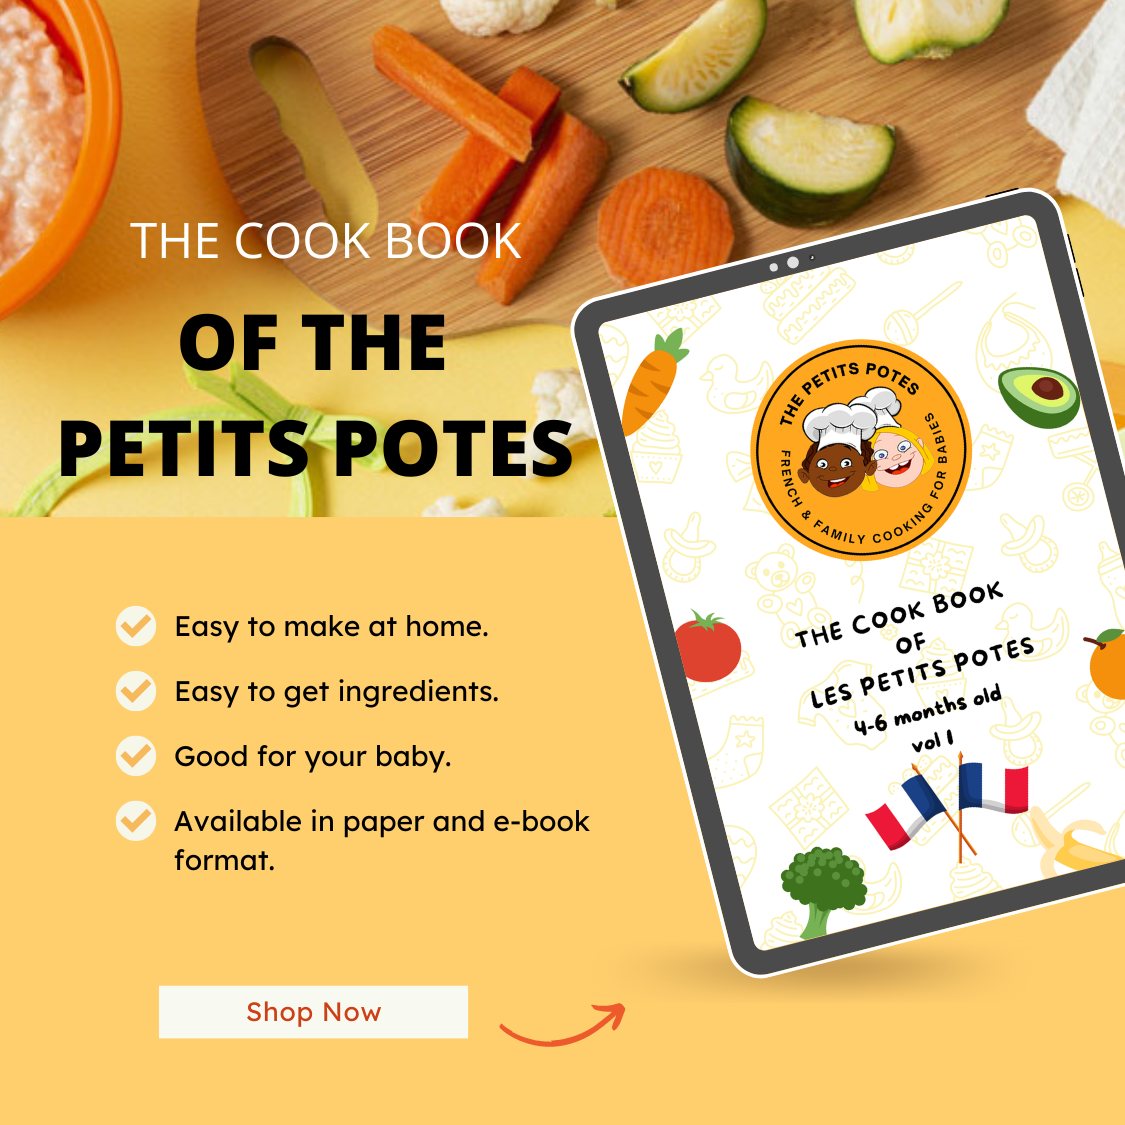 Recipe Book By the Petits Potes 4-6 Month – The Petits Potes